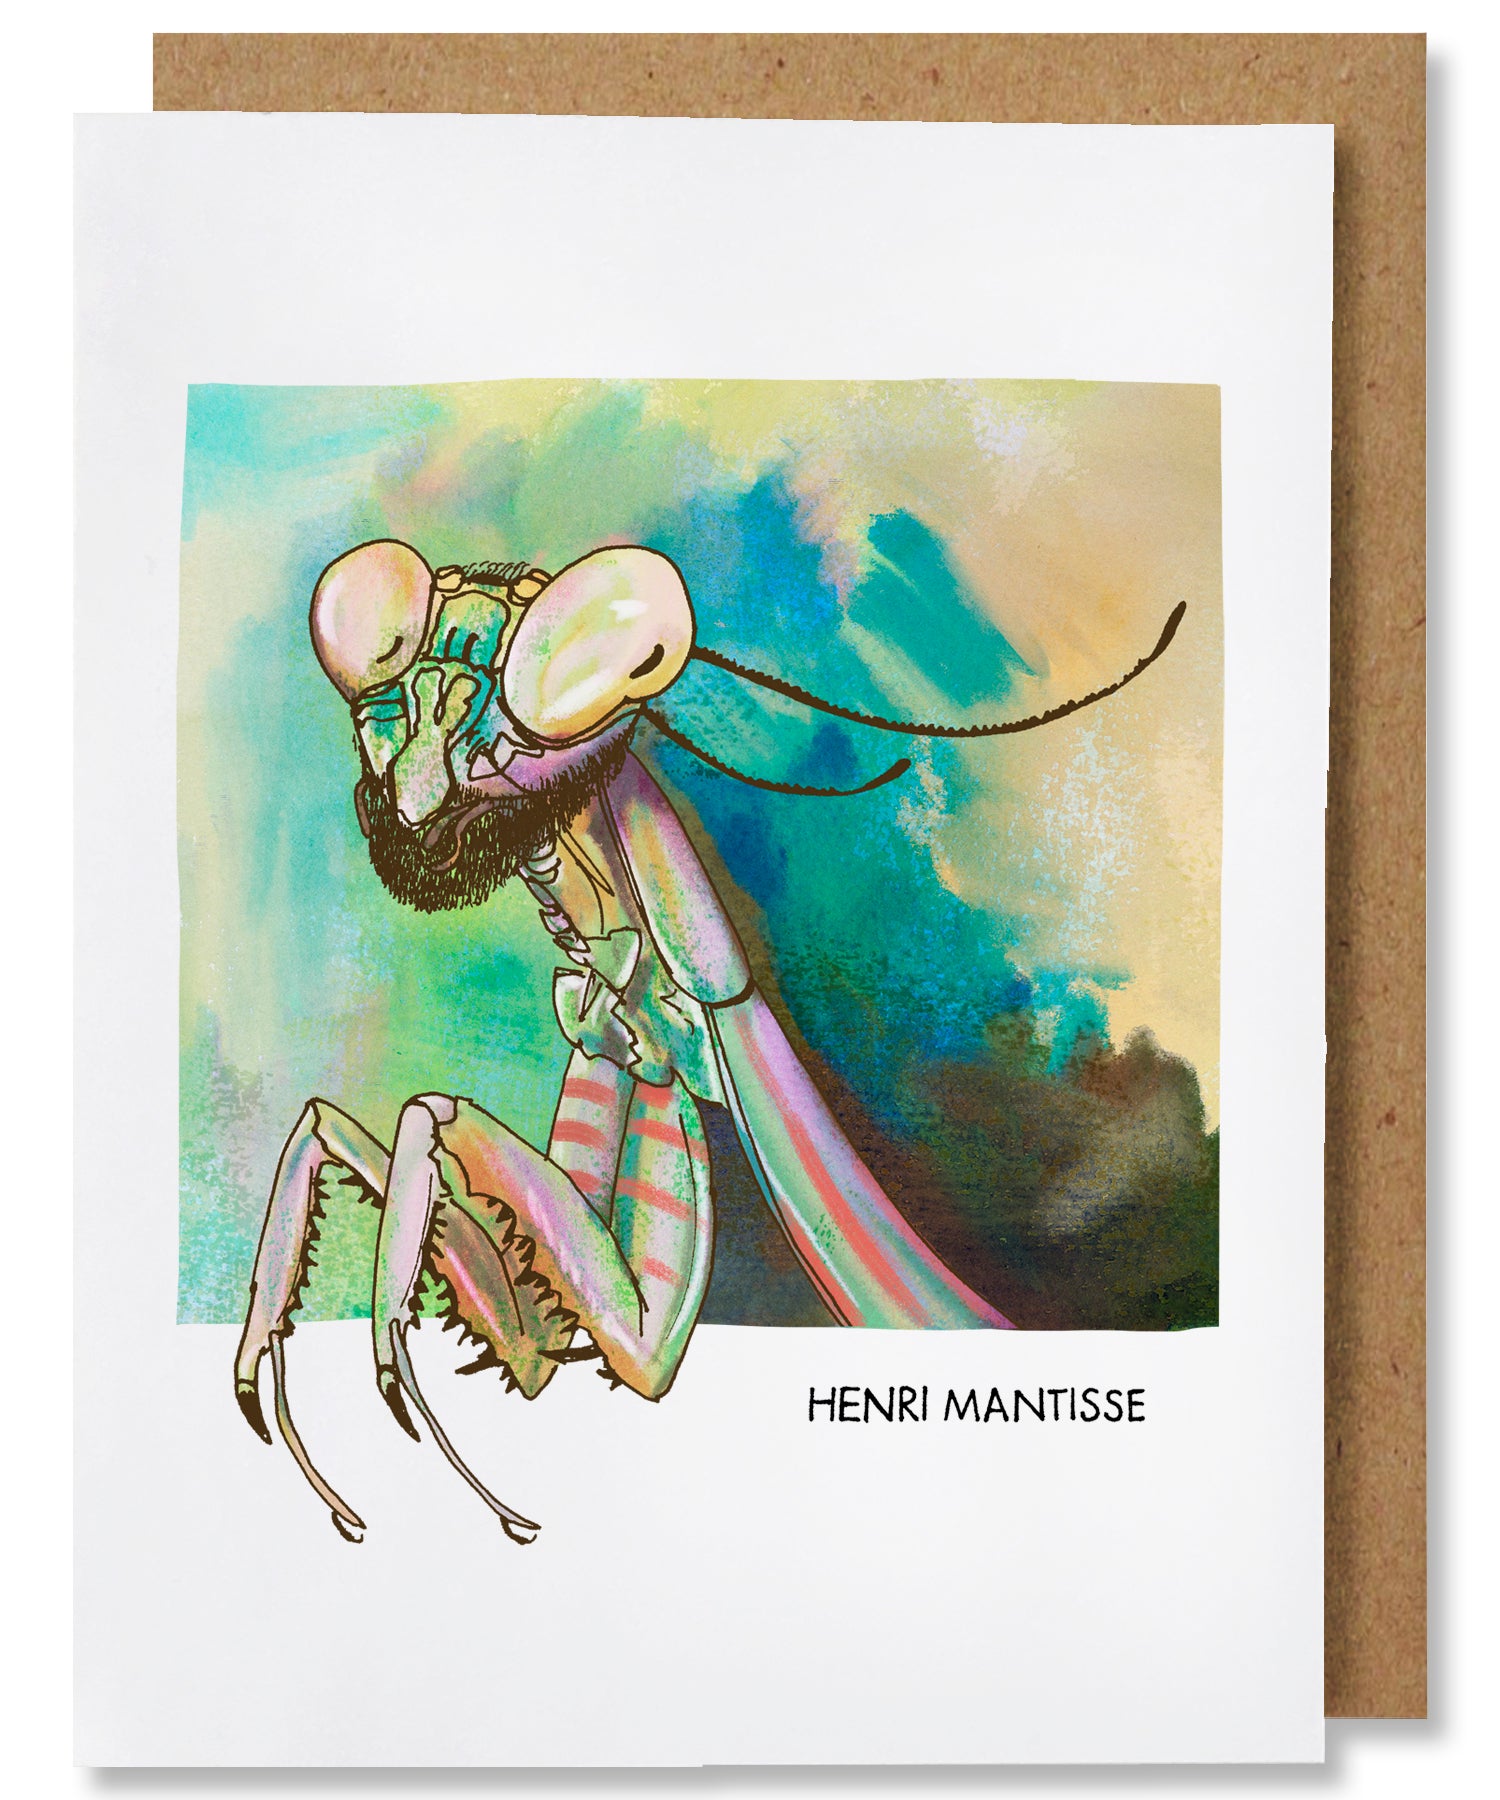 Henri Mantisse Greeting Card - Heart of the Home PA